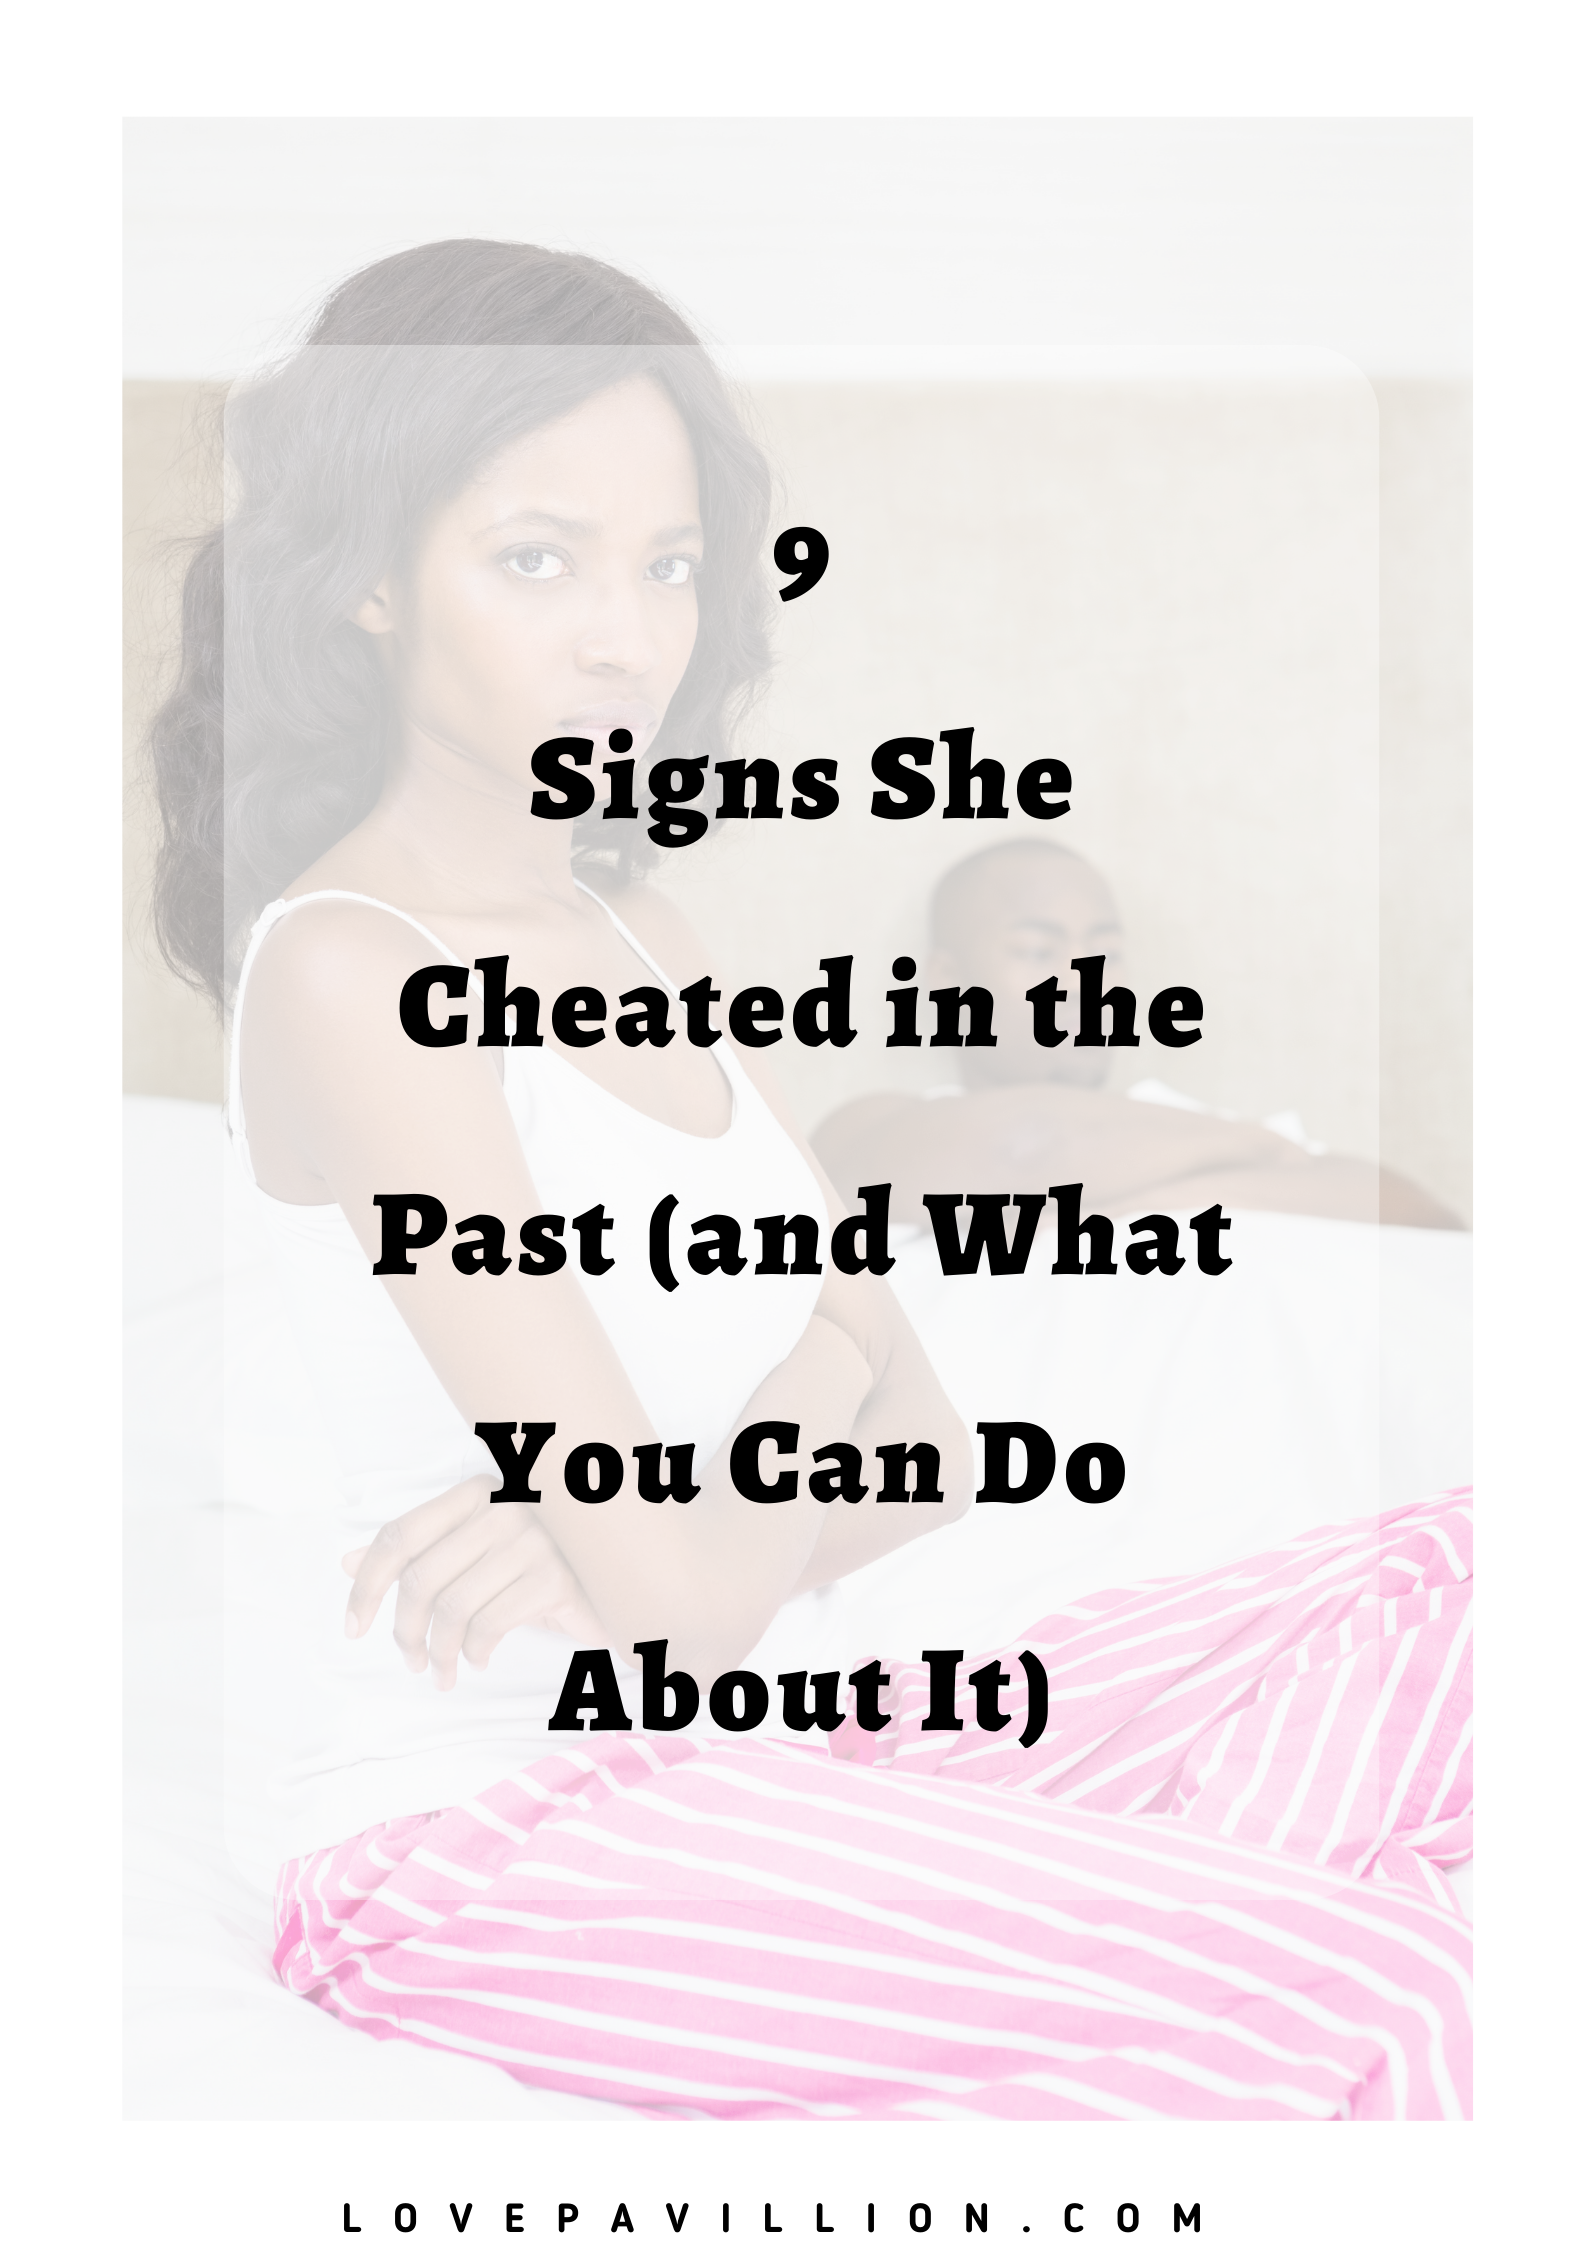 Signs She Cheated in the Past (and What You Can Do About It)